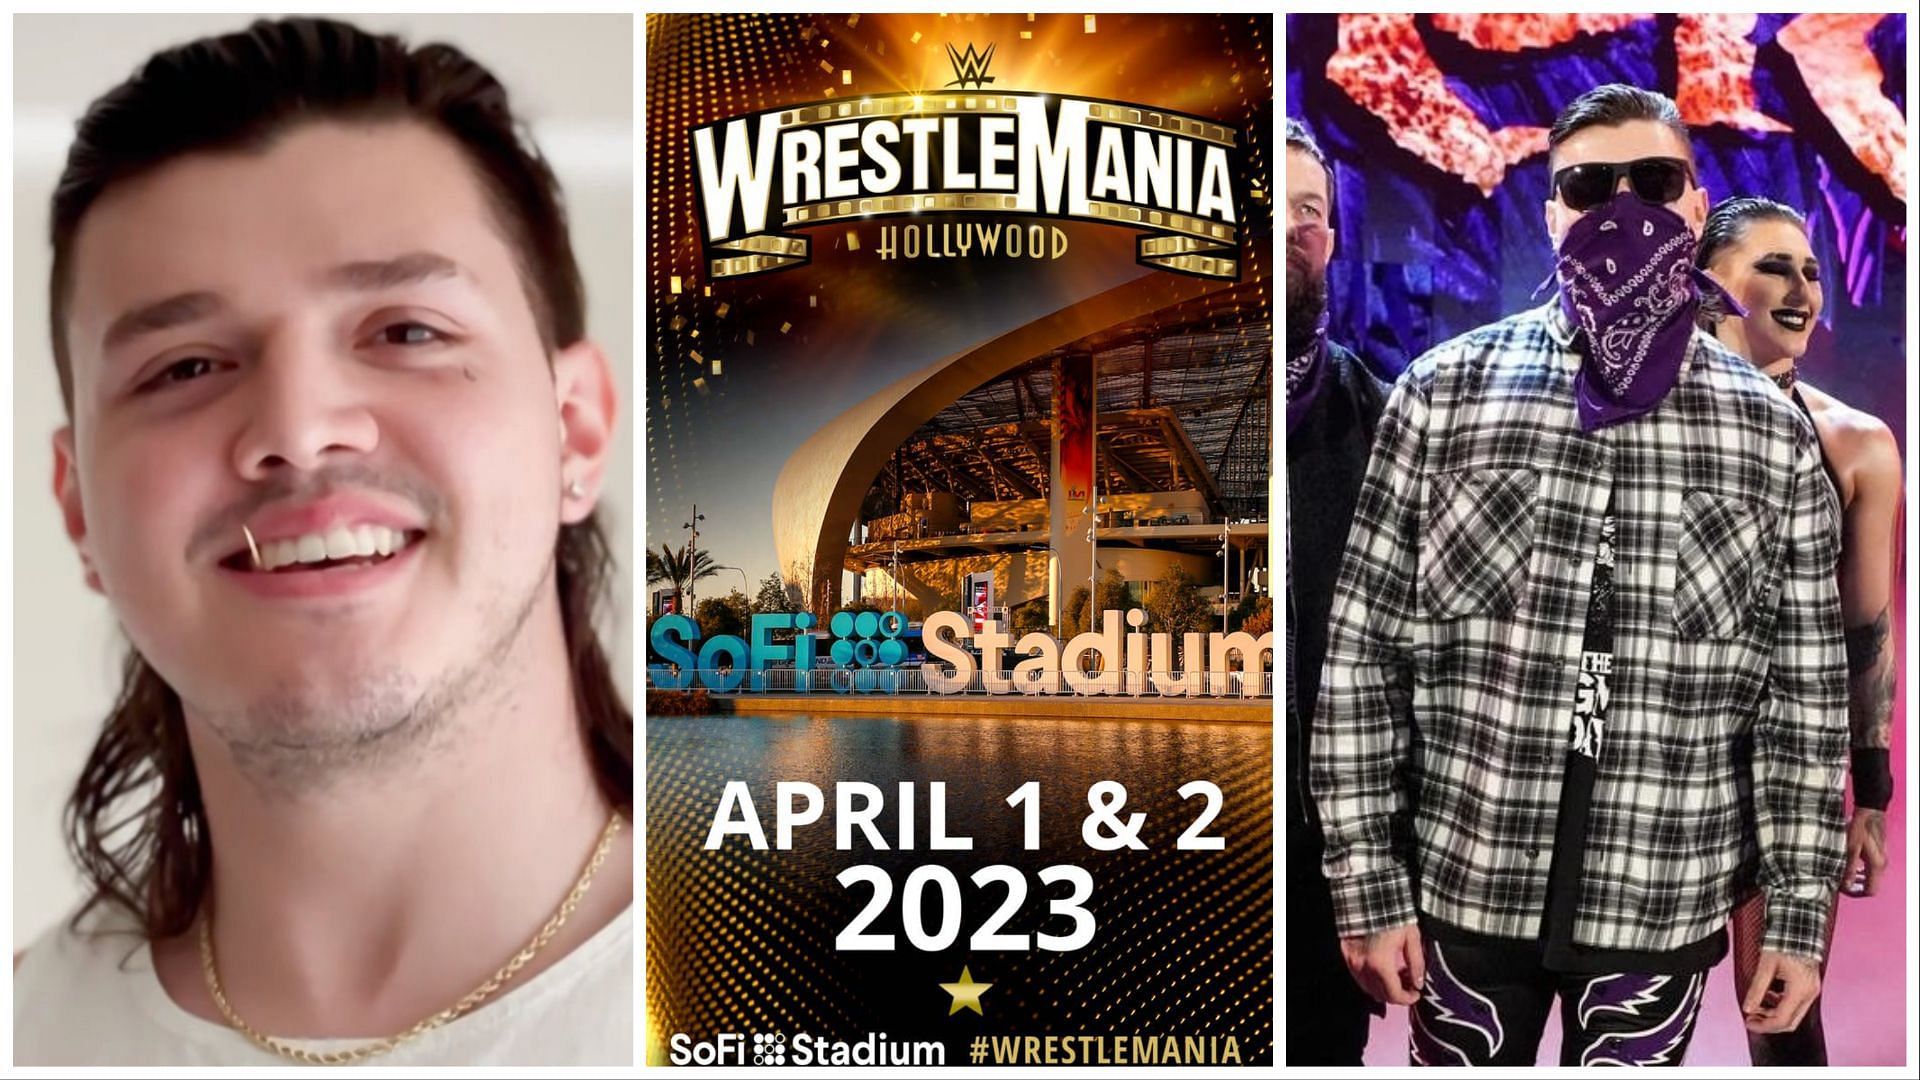 What will Dominik Mysterio be doing when WrestleMania Goes Hollywood?